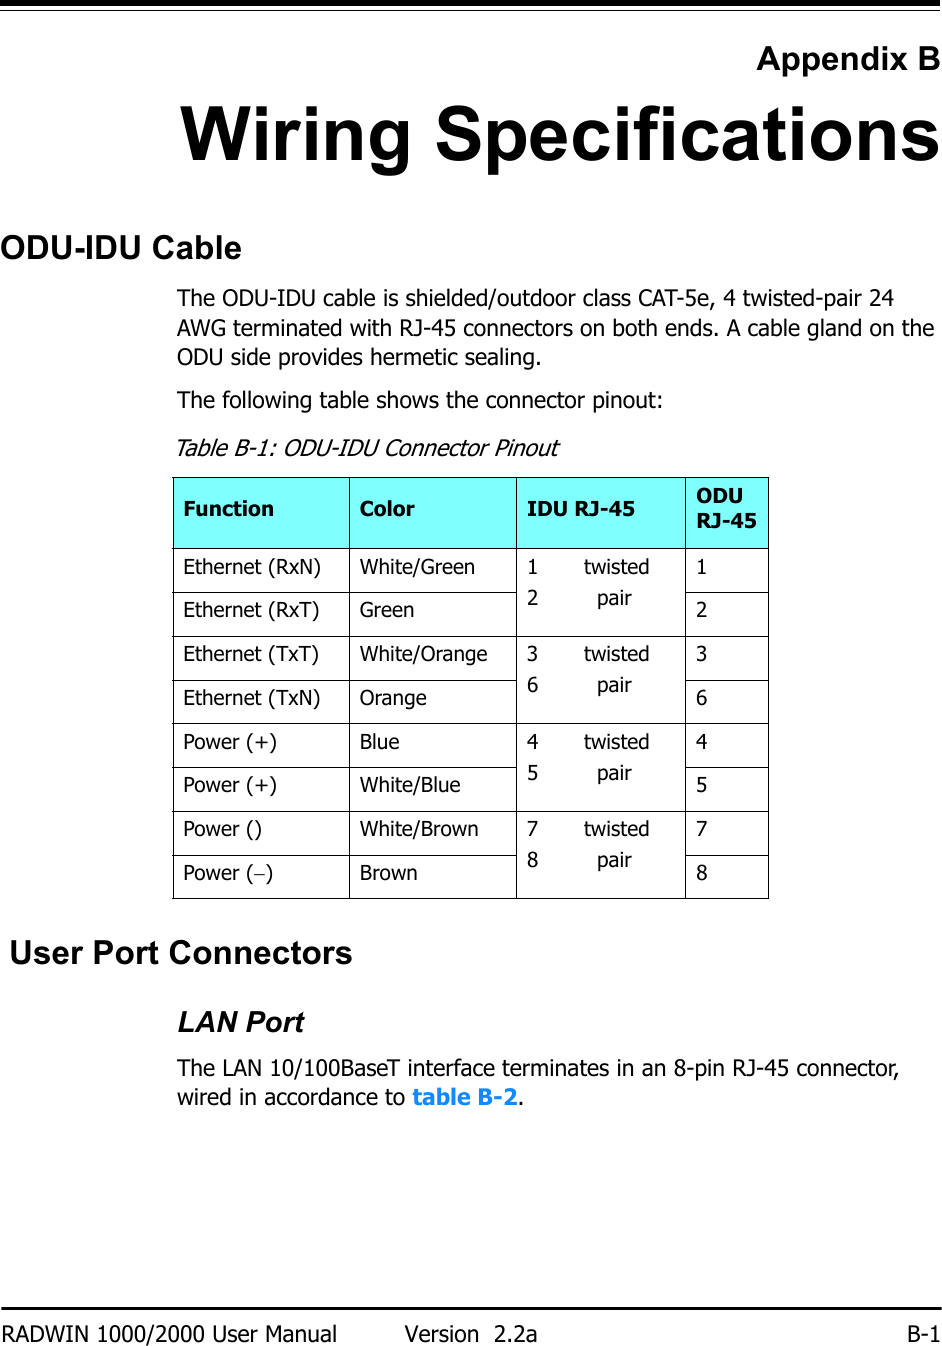 RADWIN 1000/2000 User Manual Version  2.2a B-1Appendix BWiring SpecificationsODU-IDU CableThe ODU-IDU cable is shielded/outdoor class CAT-5e, 4 twisted-pair 24 AWG terminated with RJ-45 connectors on both ends. A cable gland on the ODU side provides hermetic sealing.The following table shows the connector pinout: User Port ConnectorsLAN PortThe LAN 10/100BaseT interface terminates in an 8-pin RJ-45 connector, wired in accordance to table B-2.Table B-1: ODU-IDU Connector PinoutFunction Color IDU RJ-45 ODU RJ-45Ethernet (RxN) White/Green 1       twisted2         pair1 Ethernet (RxT) Green 2 Ethernet (TxT) White/Orange 3       twisted6         pair3 Ethernet (TxN) Orange 6 Power (+) Blue 4       twisted5         pair4 Power (+) White/Blue 5 Power () White/Brown 7       twisted8         pair7 Power (−)Brown 8 